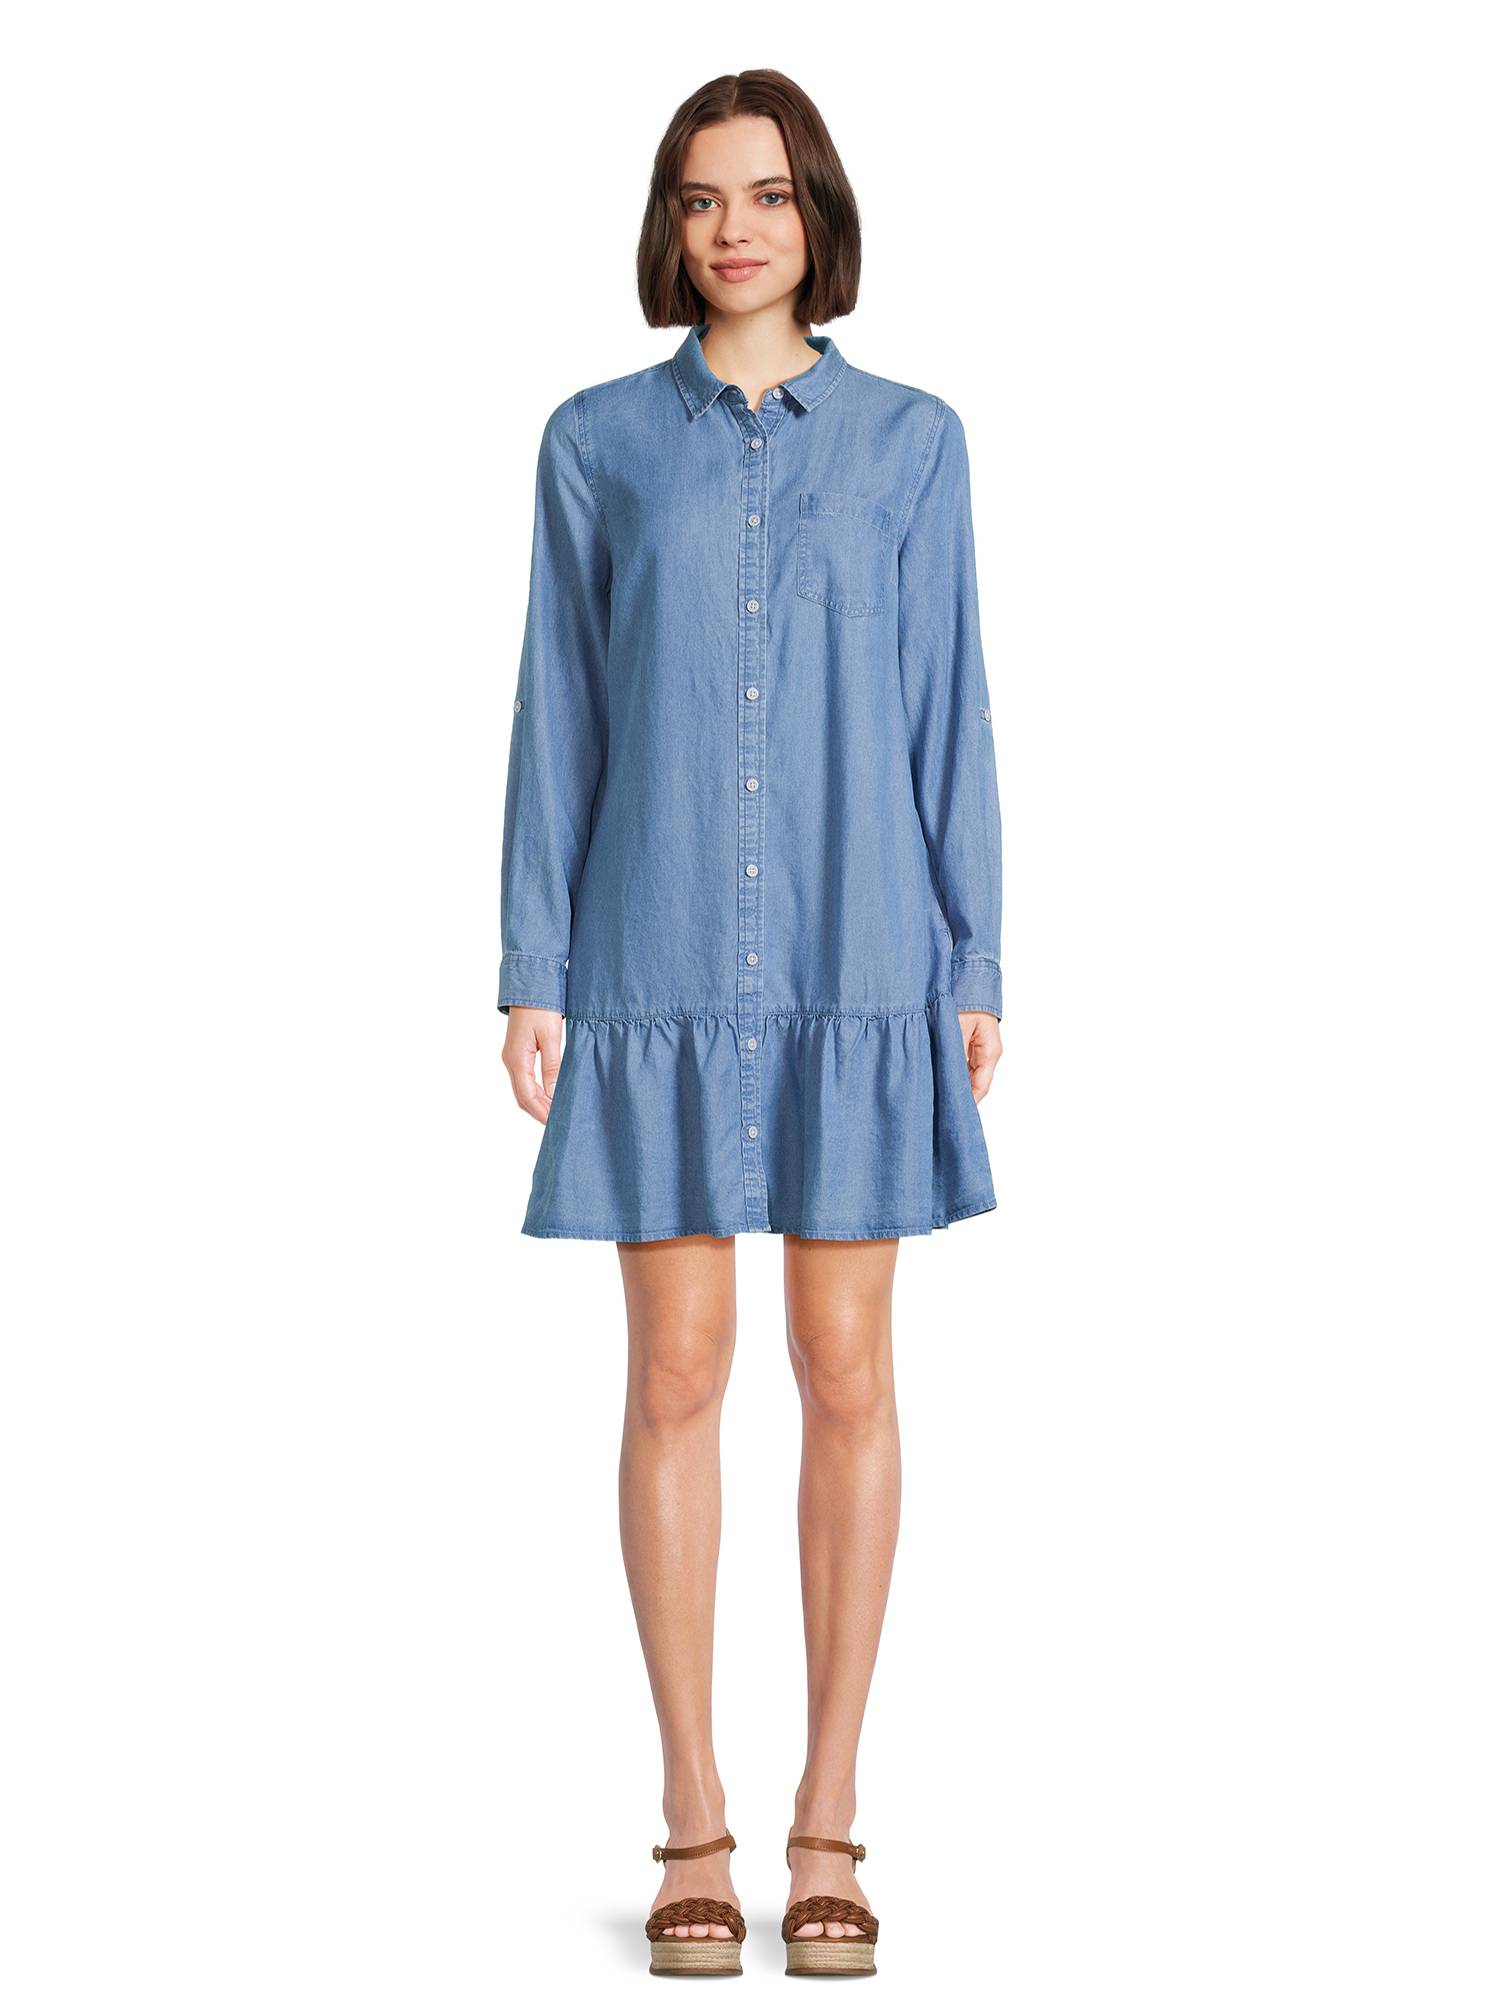 Time and Tru Women's Mini Shirt Dress with Long Sleeves, Sizes XS-3XL - image 1 of 5